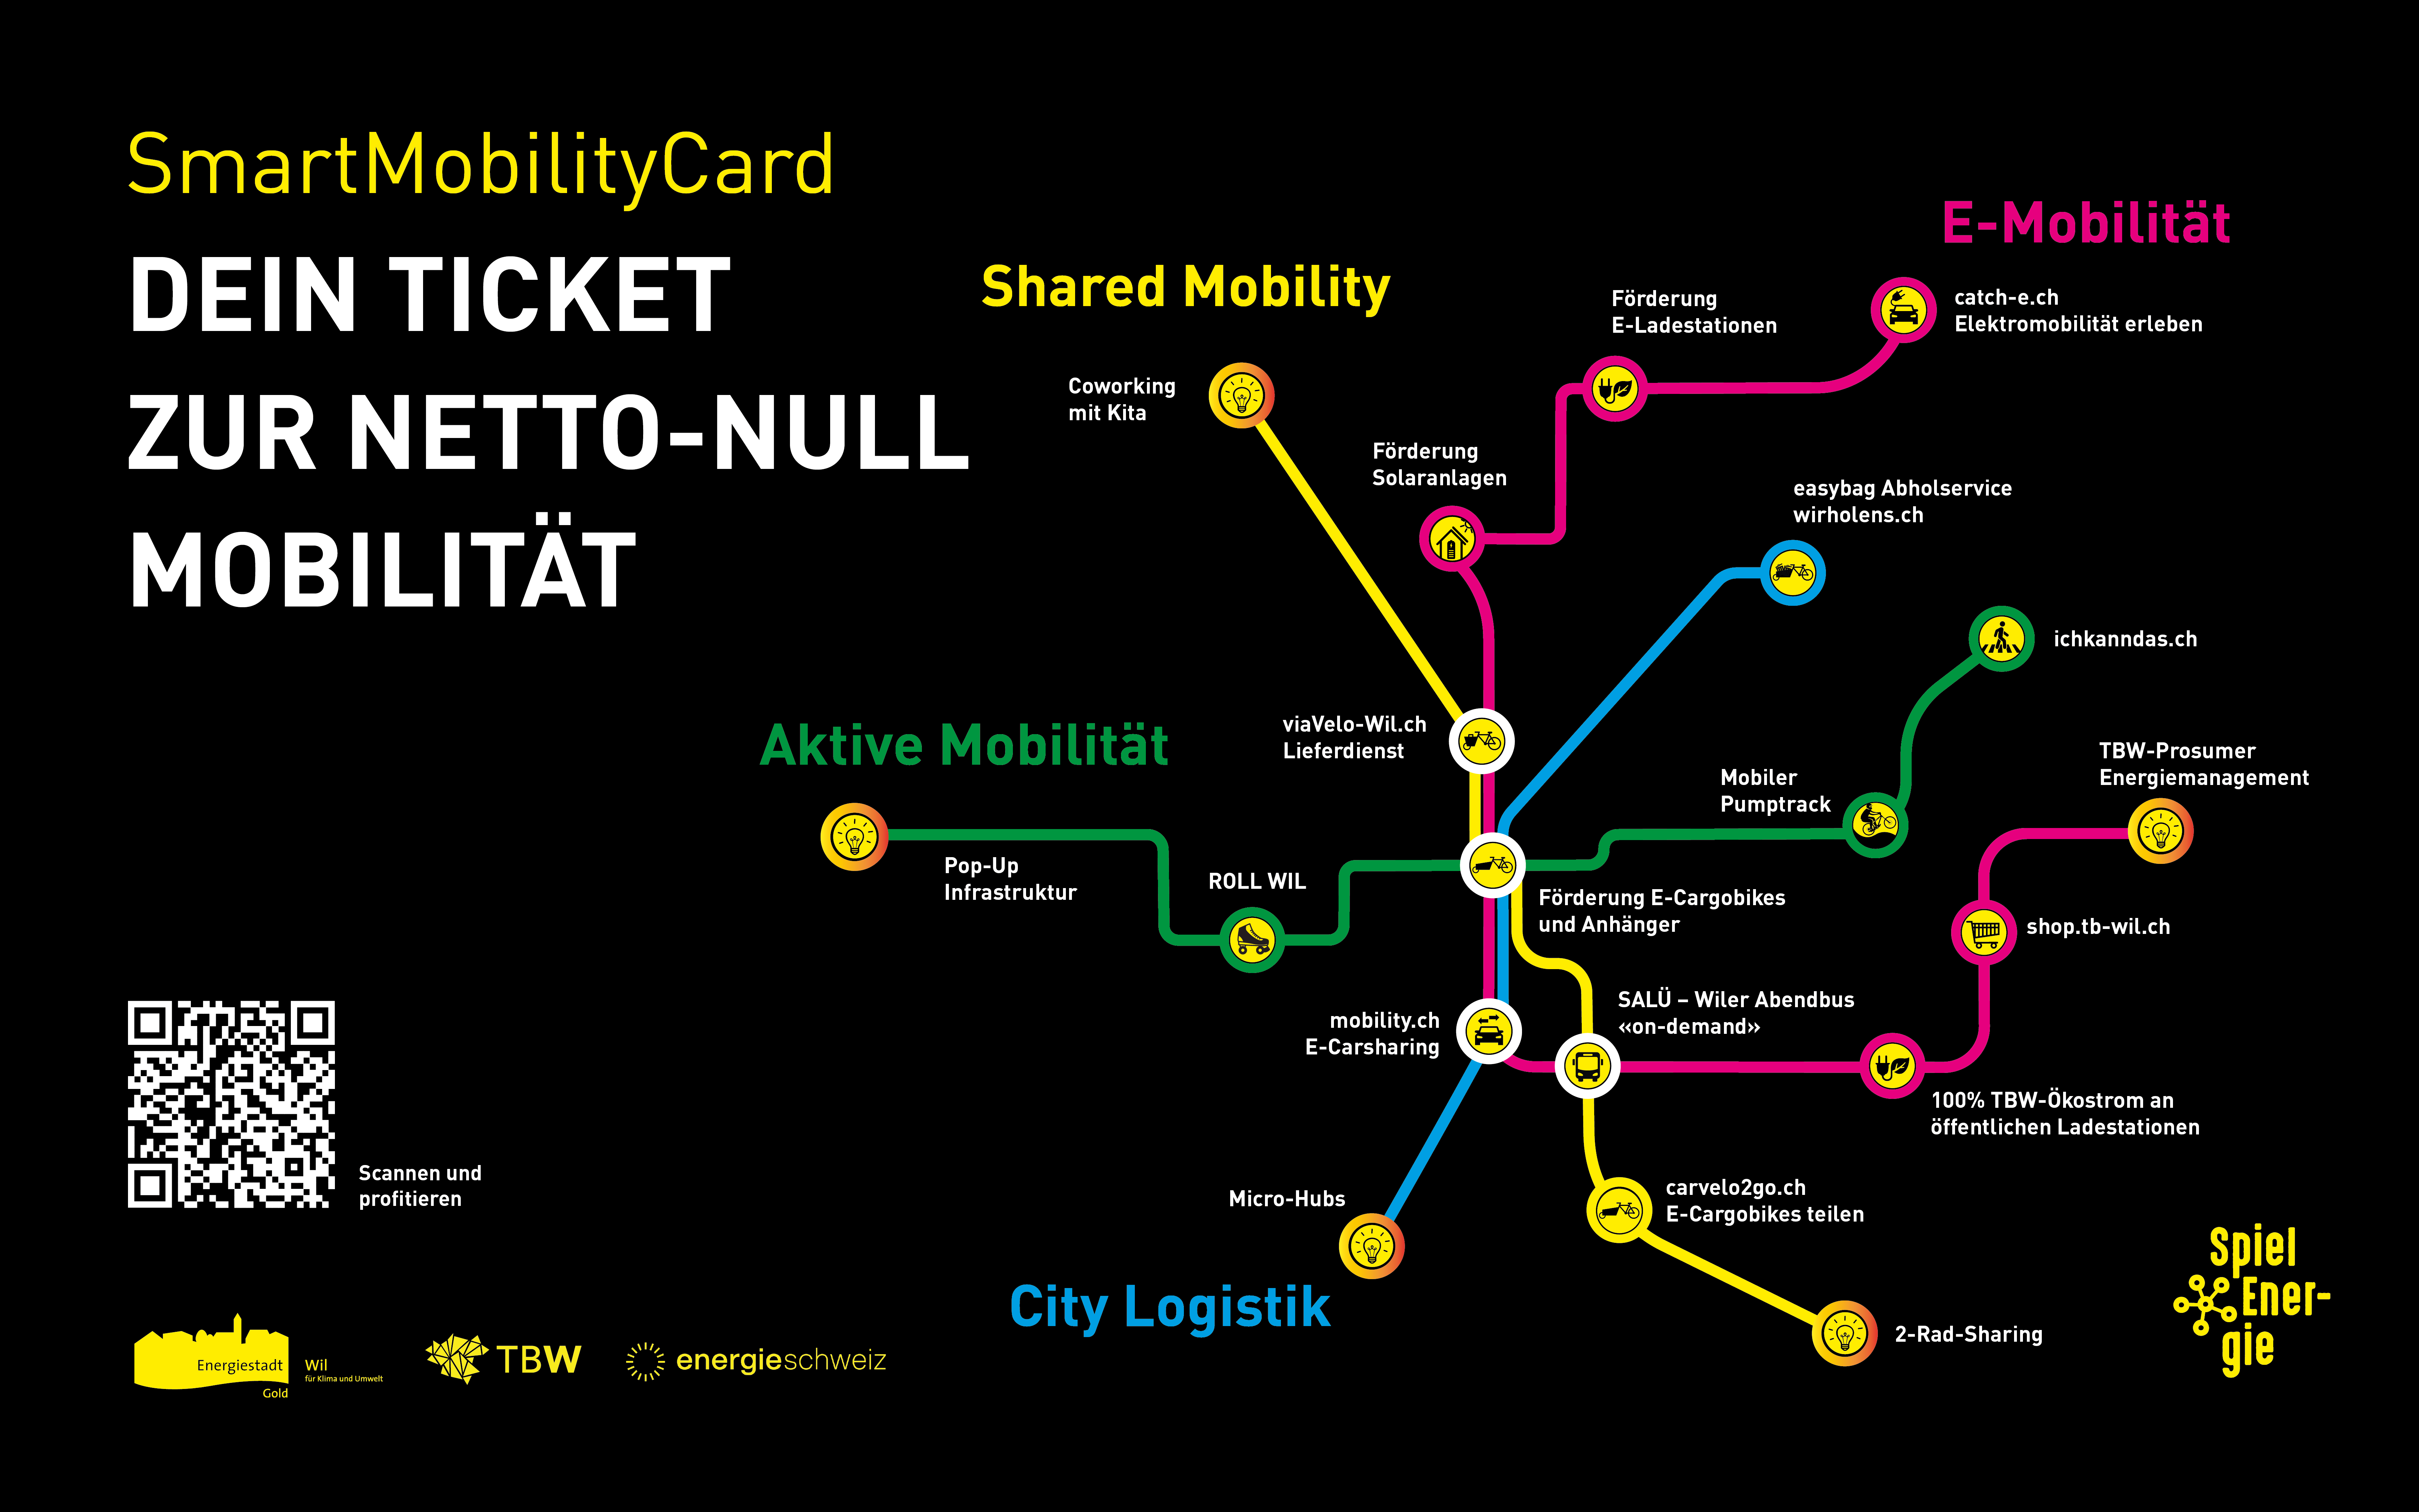 Spiel Energie Mobility Card